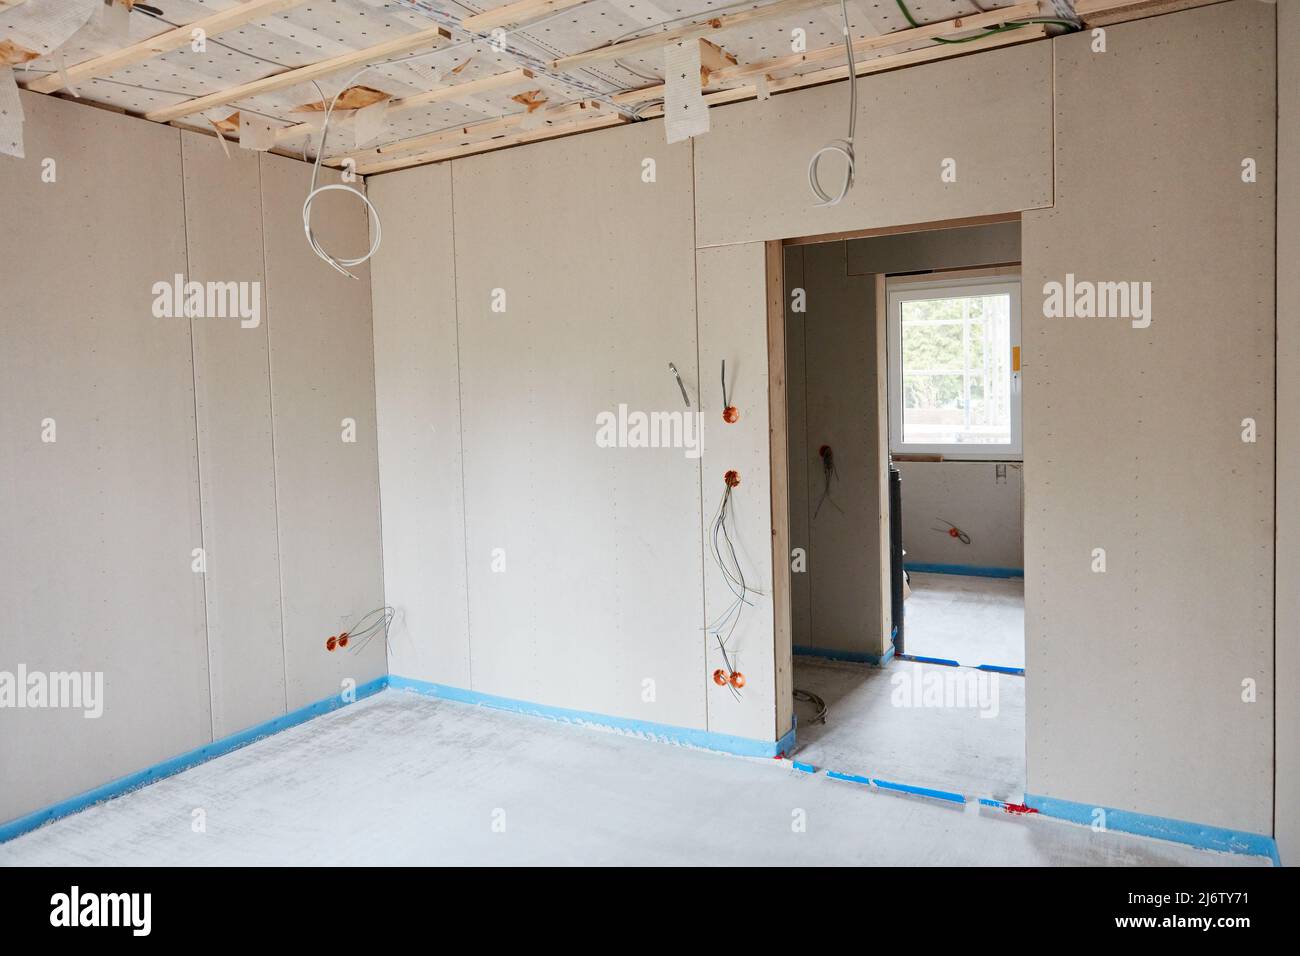 Corner in the room with door opening and fresh screed on construction site for house construction Stock Photo